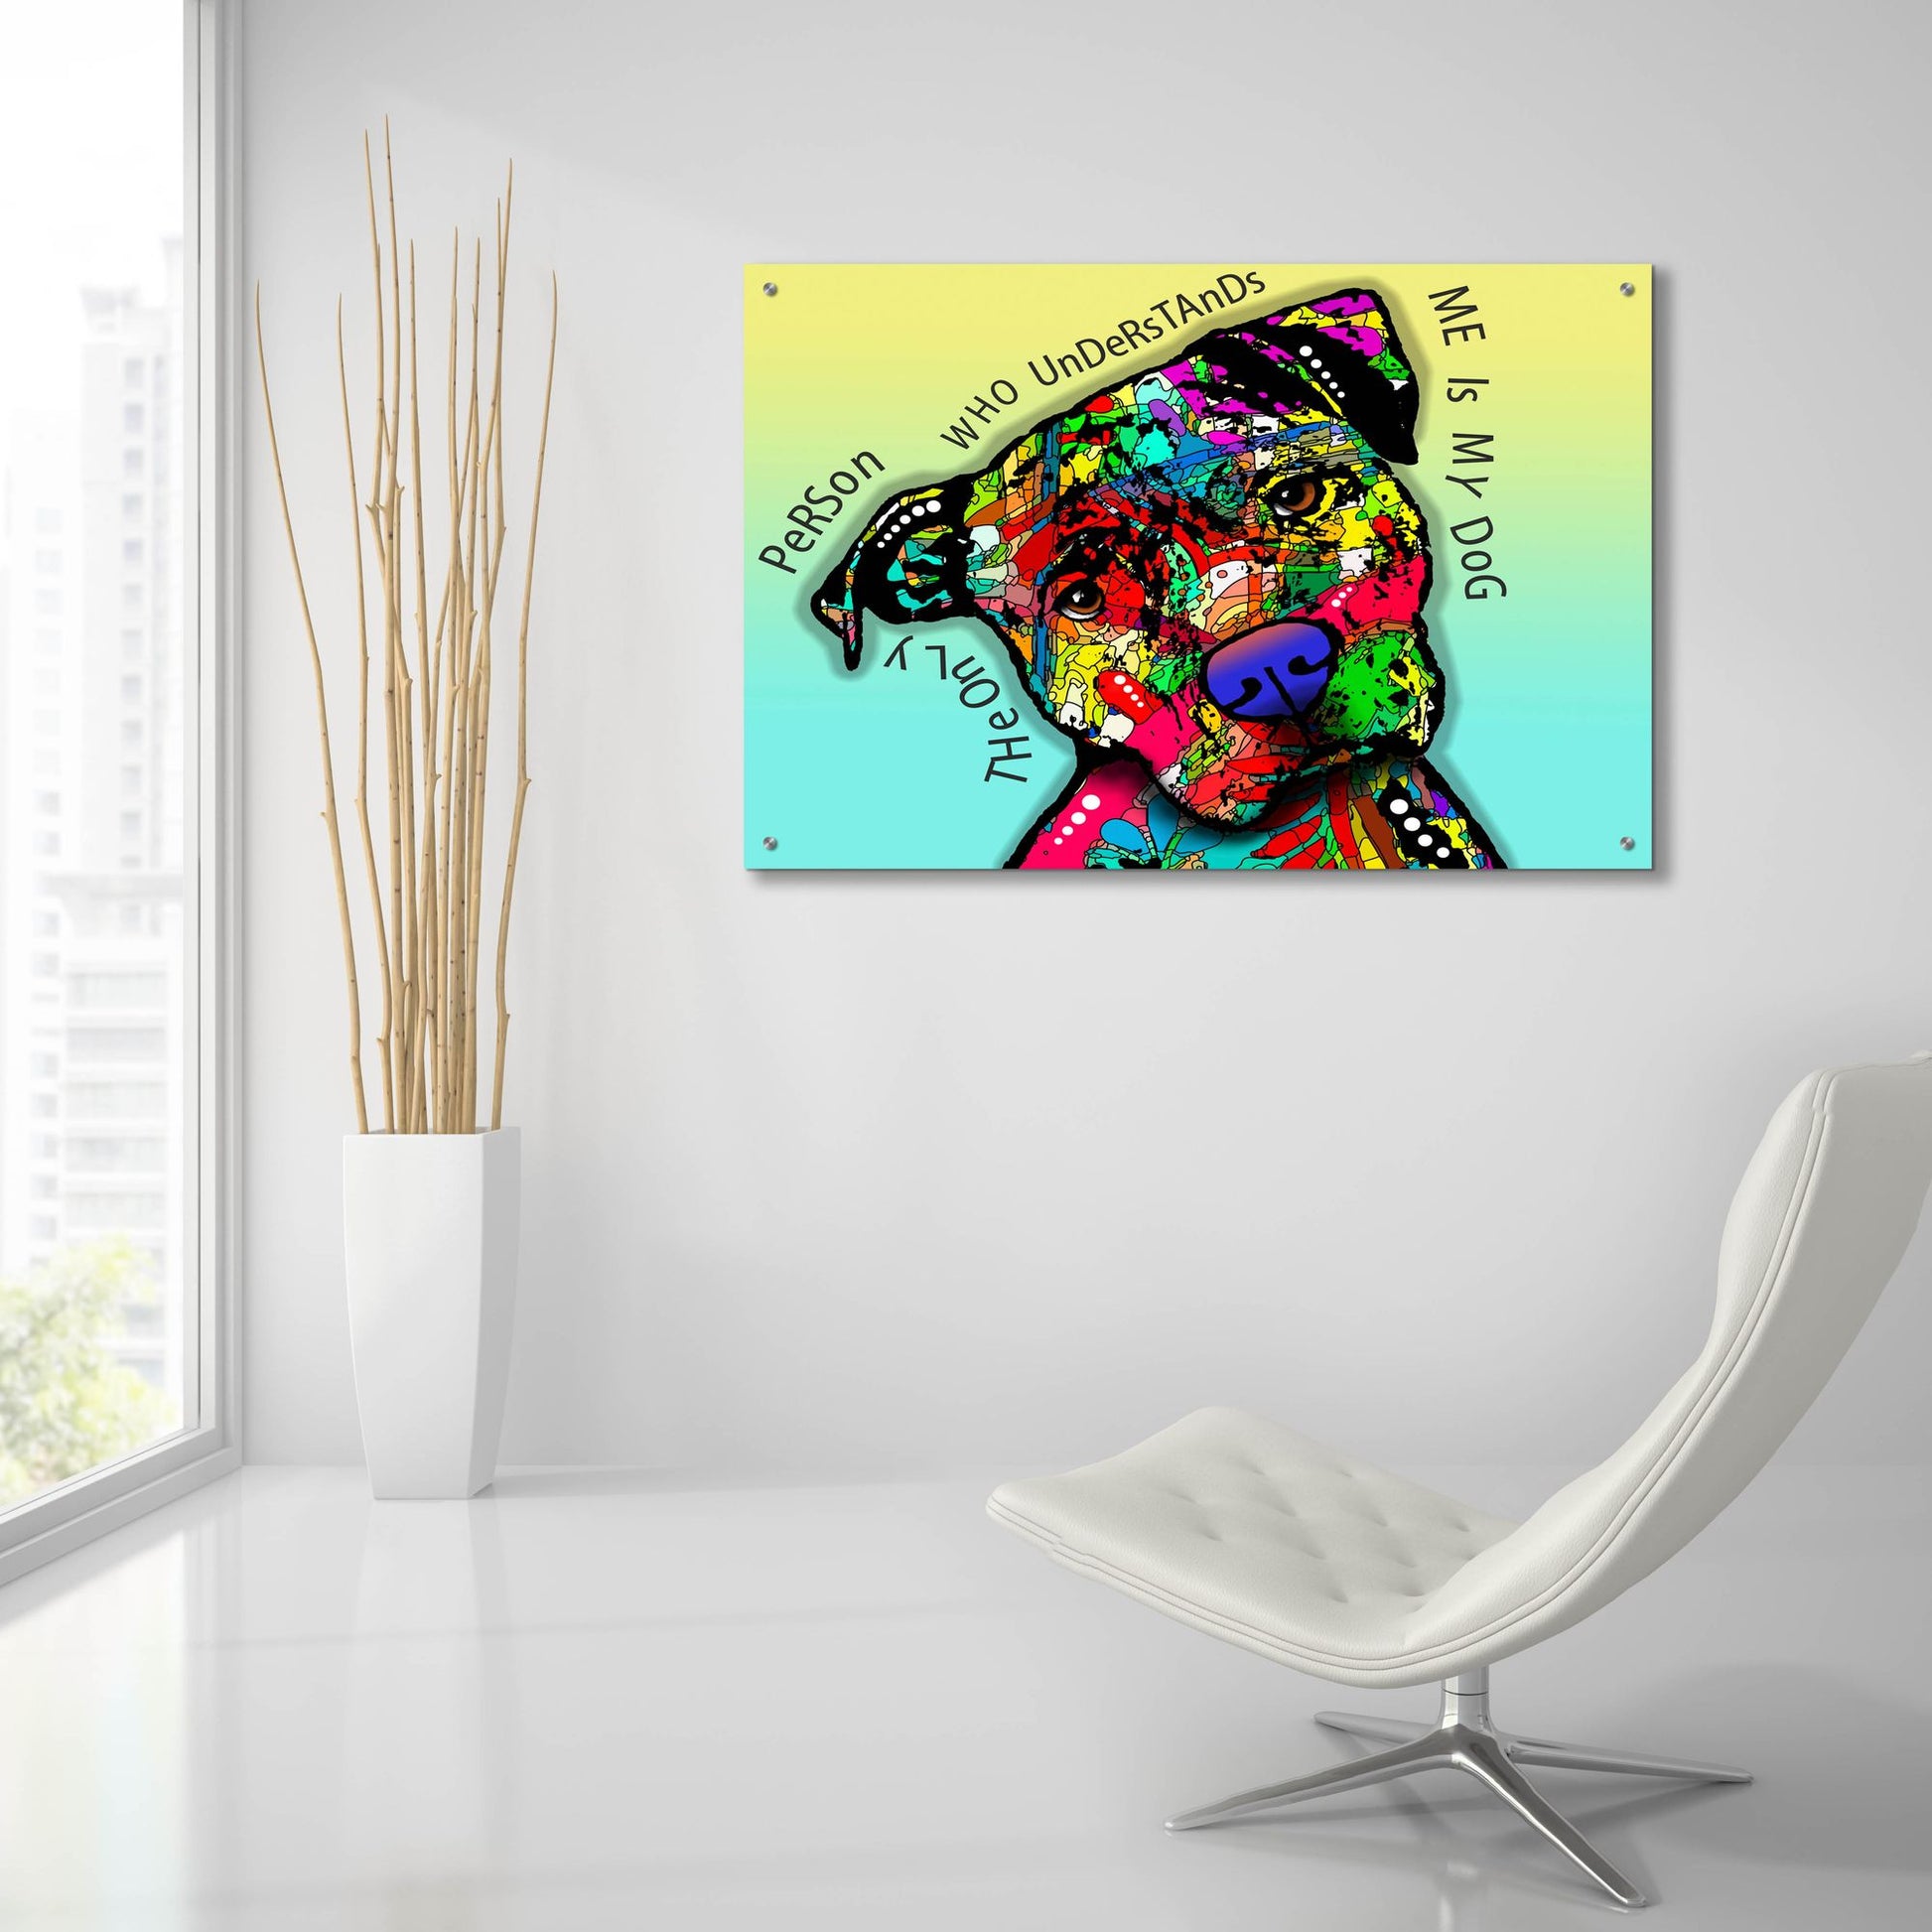 Epic Art 'The Only Person' by Dean Russo Studios, Acrylic Glass Wall Art,36x24